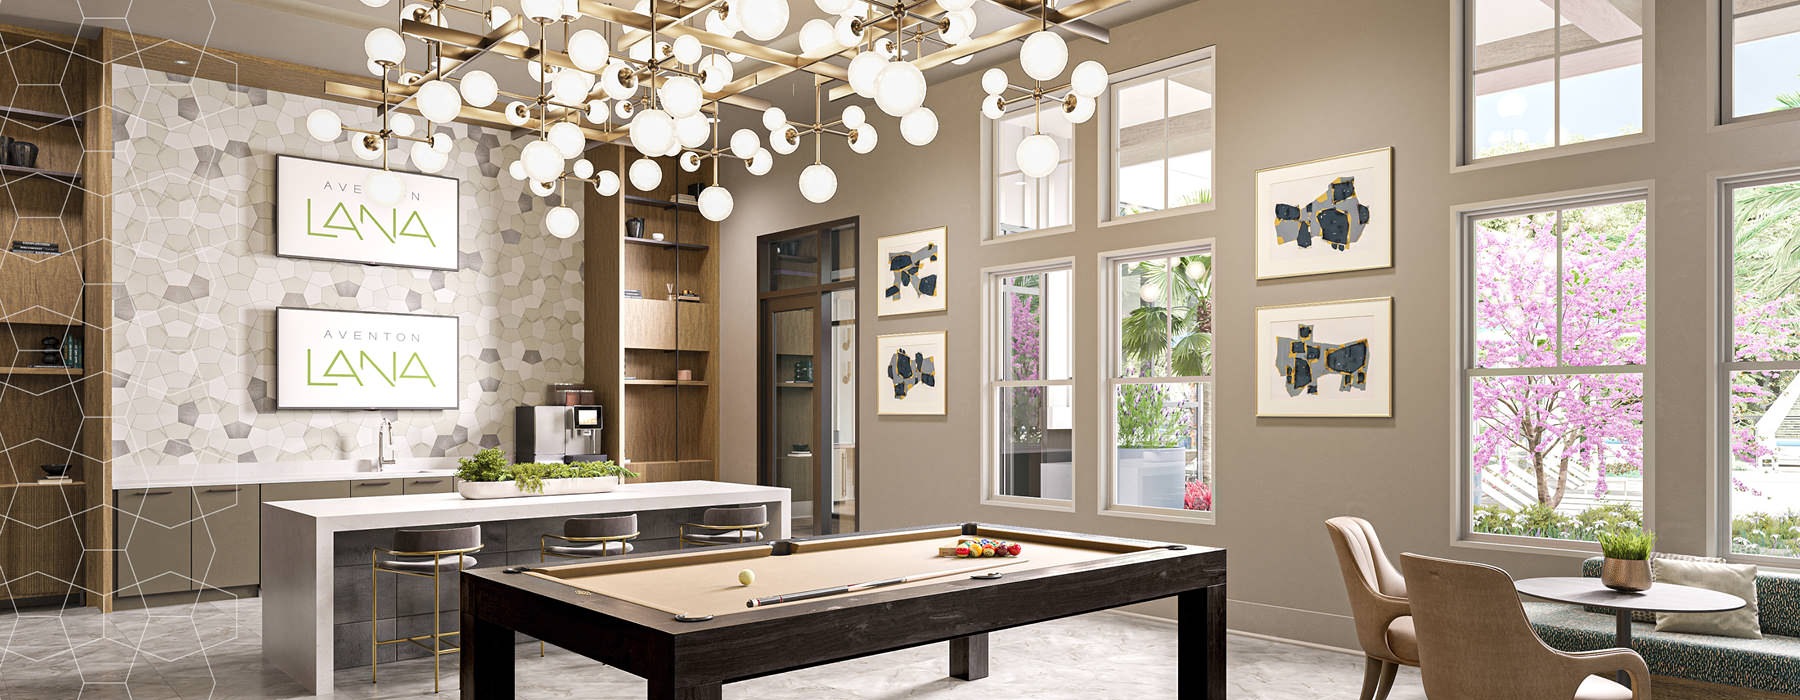 Aventon Lana's Game Room with billiards table and chandelier